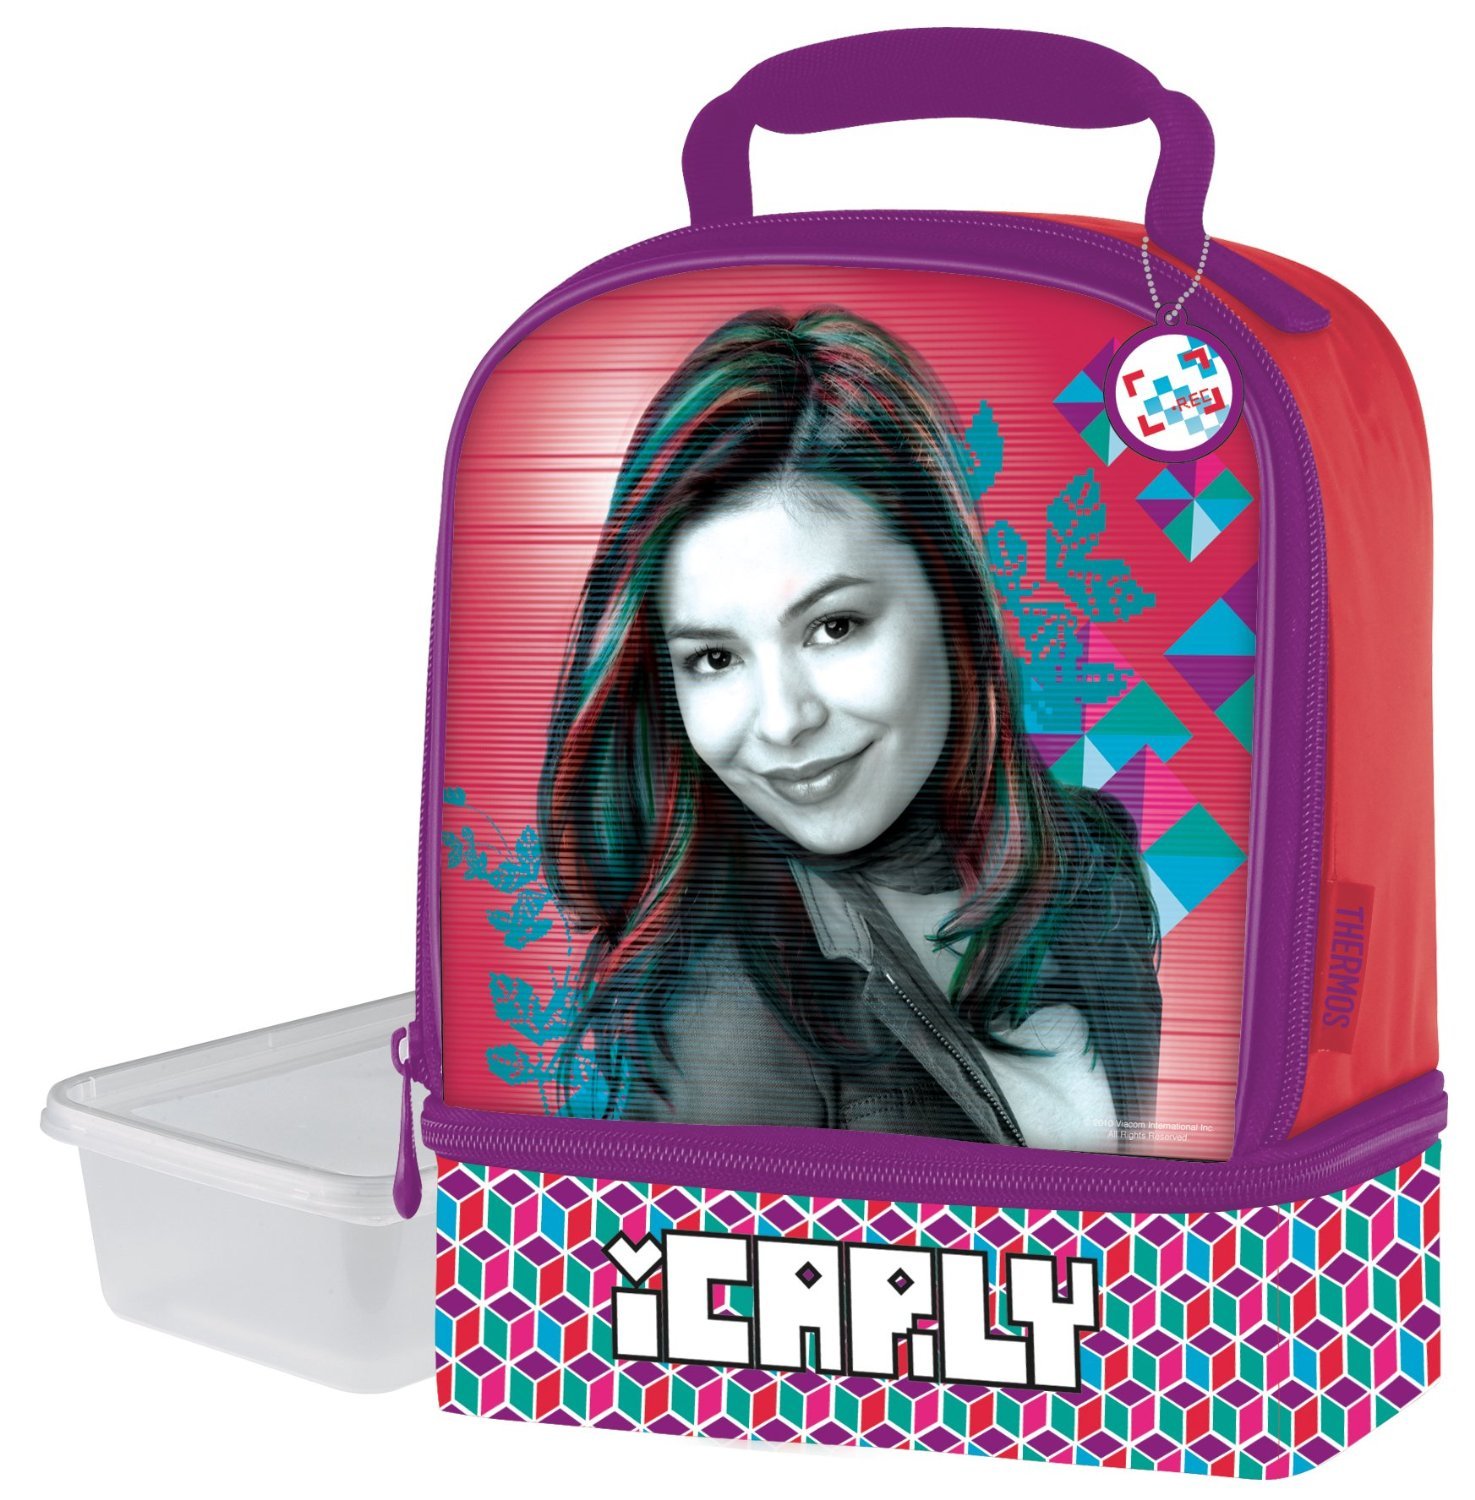 iCarly Lunch Bag and Lunch Box - Cool Stuff to Buy and Collect